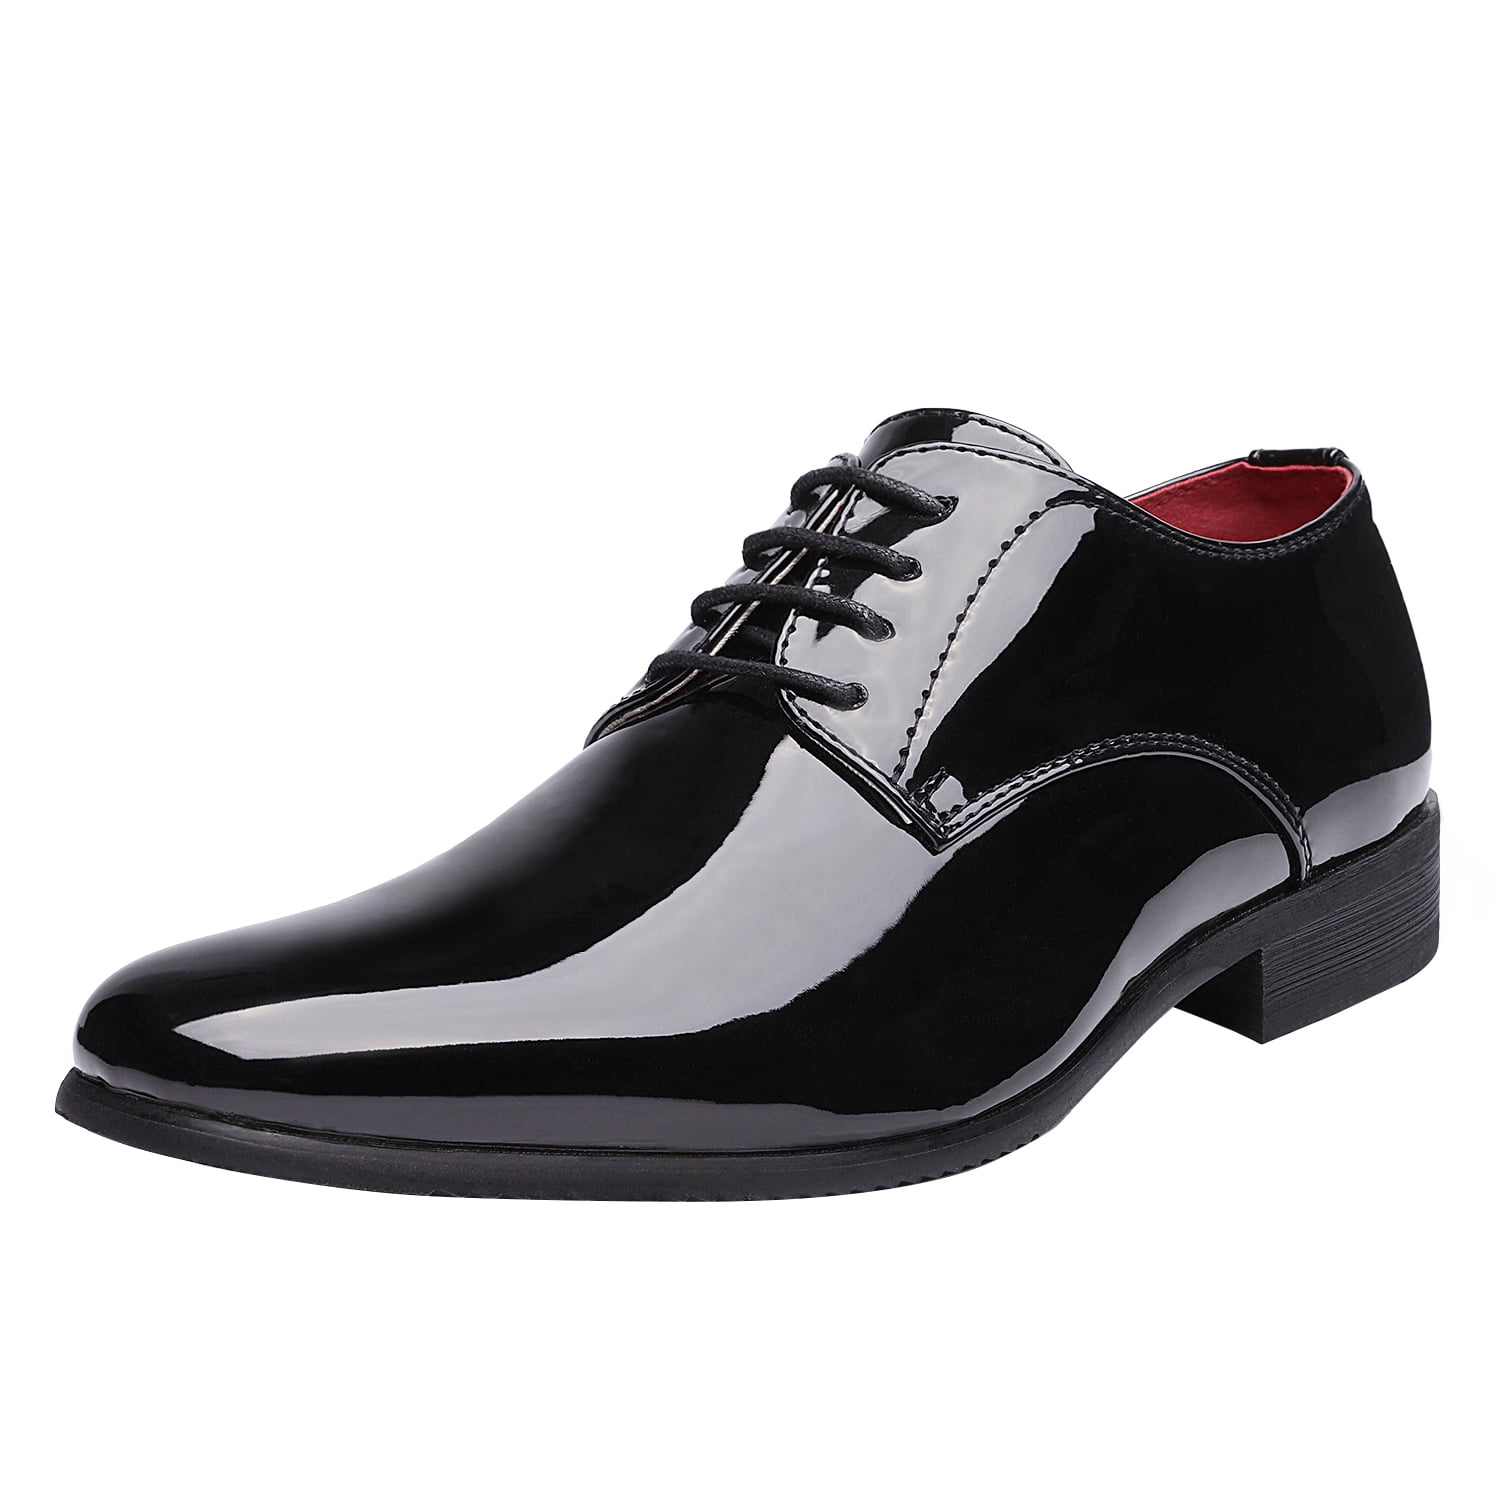 New Men's Leather Look formal Smart Casual Office Lace Up shoes Black Size 6-12 